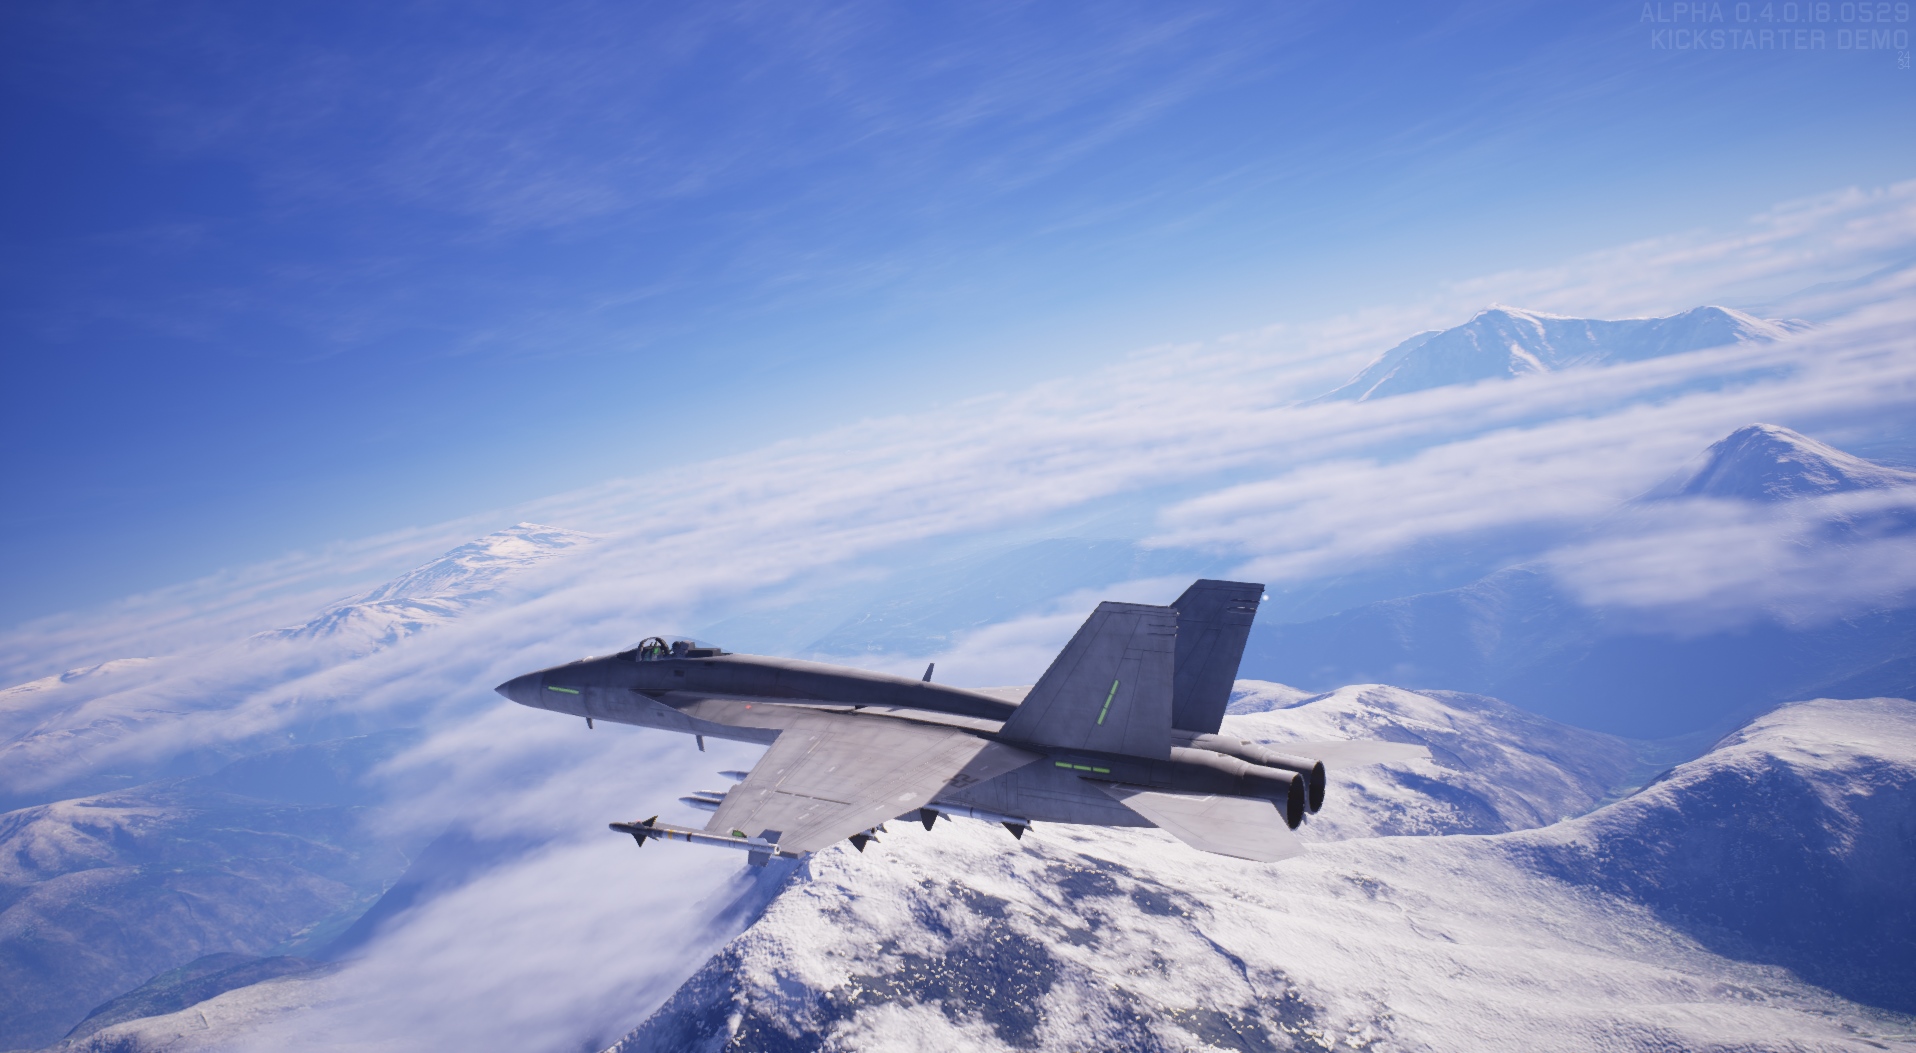 Project Wingman looks like Ace Combat 7 but with full VR support